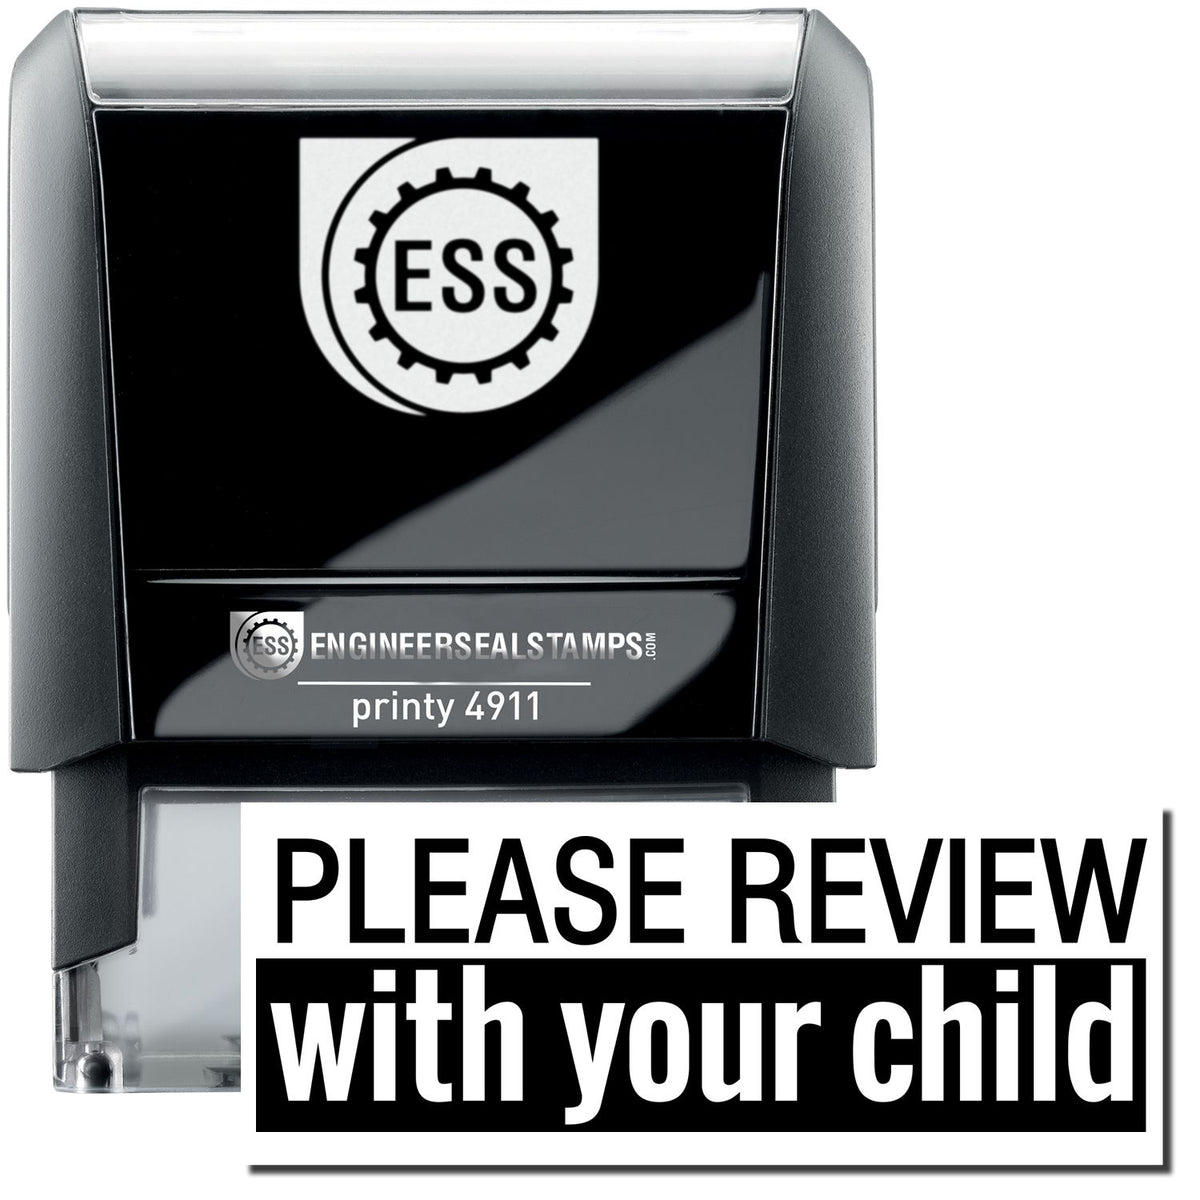 A self-inking stamp with a stamped image showing how the text &quot;PLEASE REVIEW with your child&quot; in a two-color format is displayed after stamping.